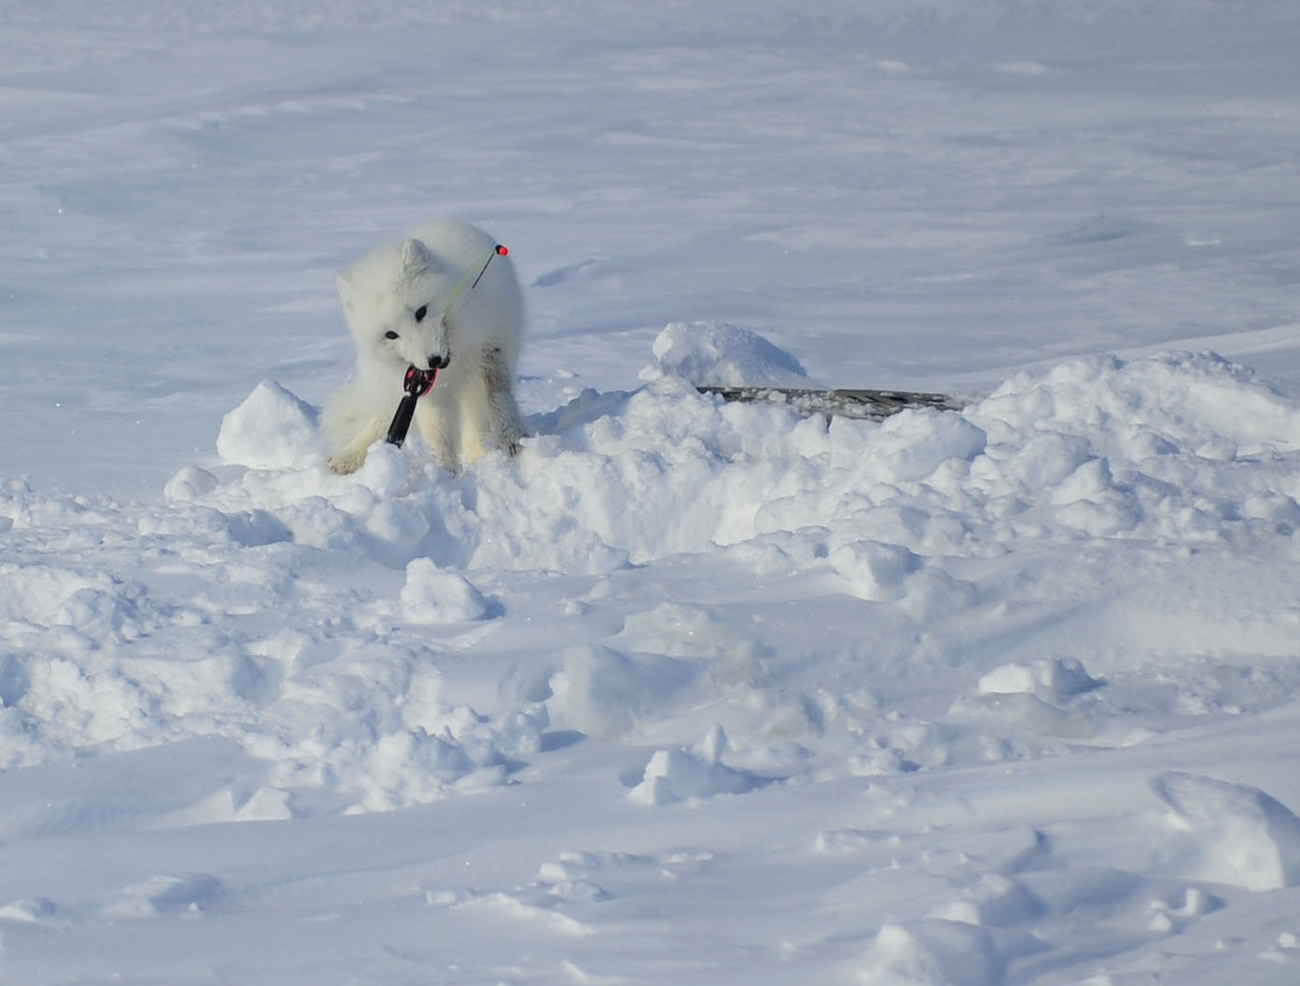 The arctic fox is trying to catch a fish, making it difficult for the fi...